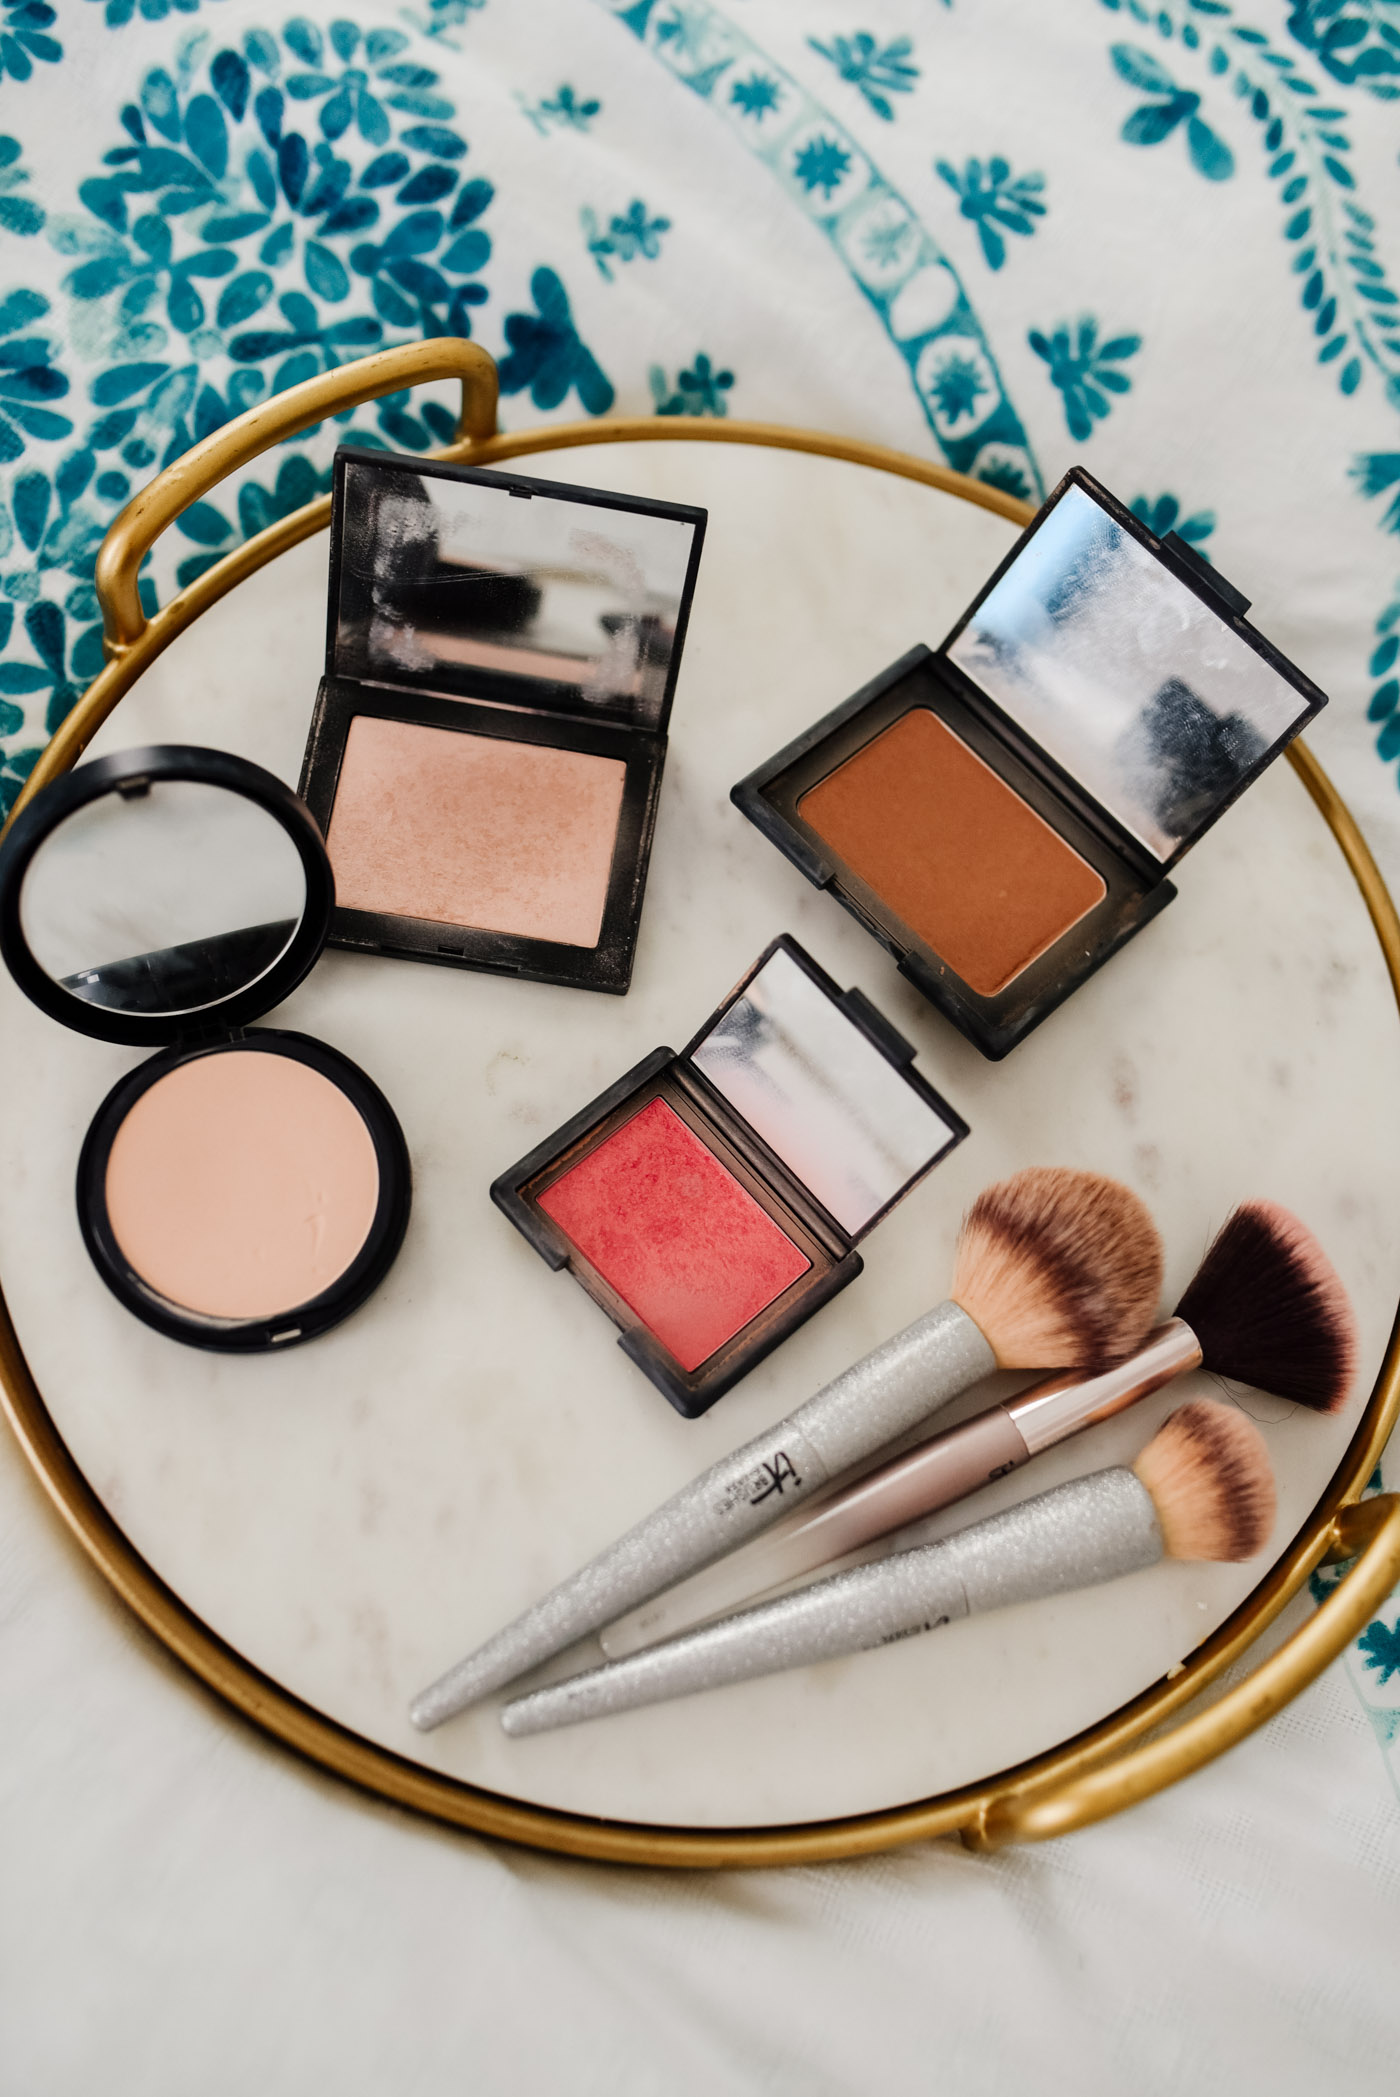 Morning Skin Care Routine by popular Memphis beauty blog, Lone Star Looking Glass: image of Nars blush, Nars bronzer, Bare Minerals setting powder and IT cosmetics brushes on a marble and gold tray. 